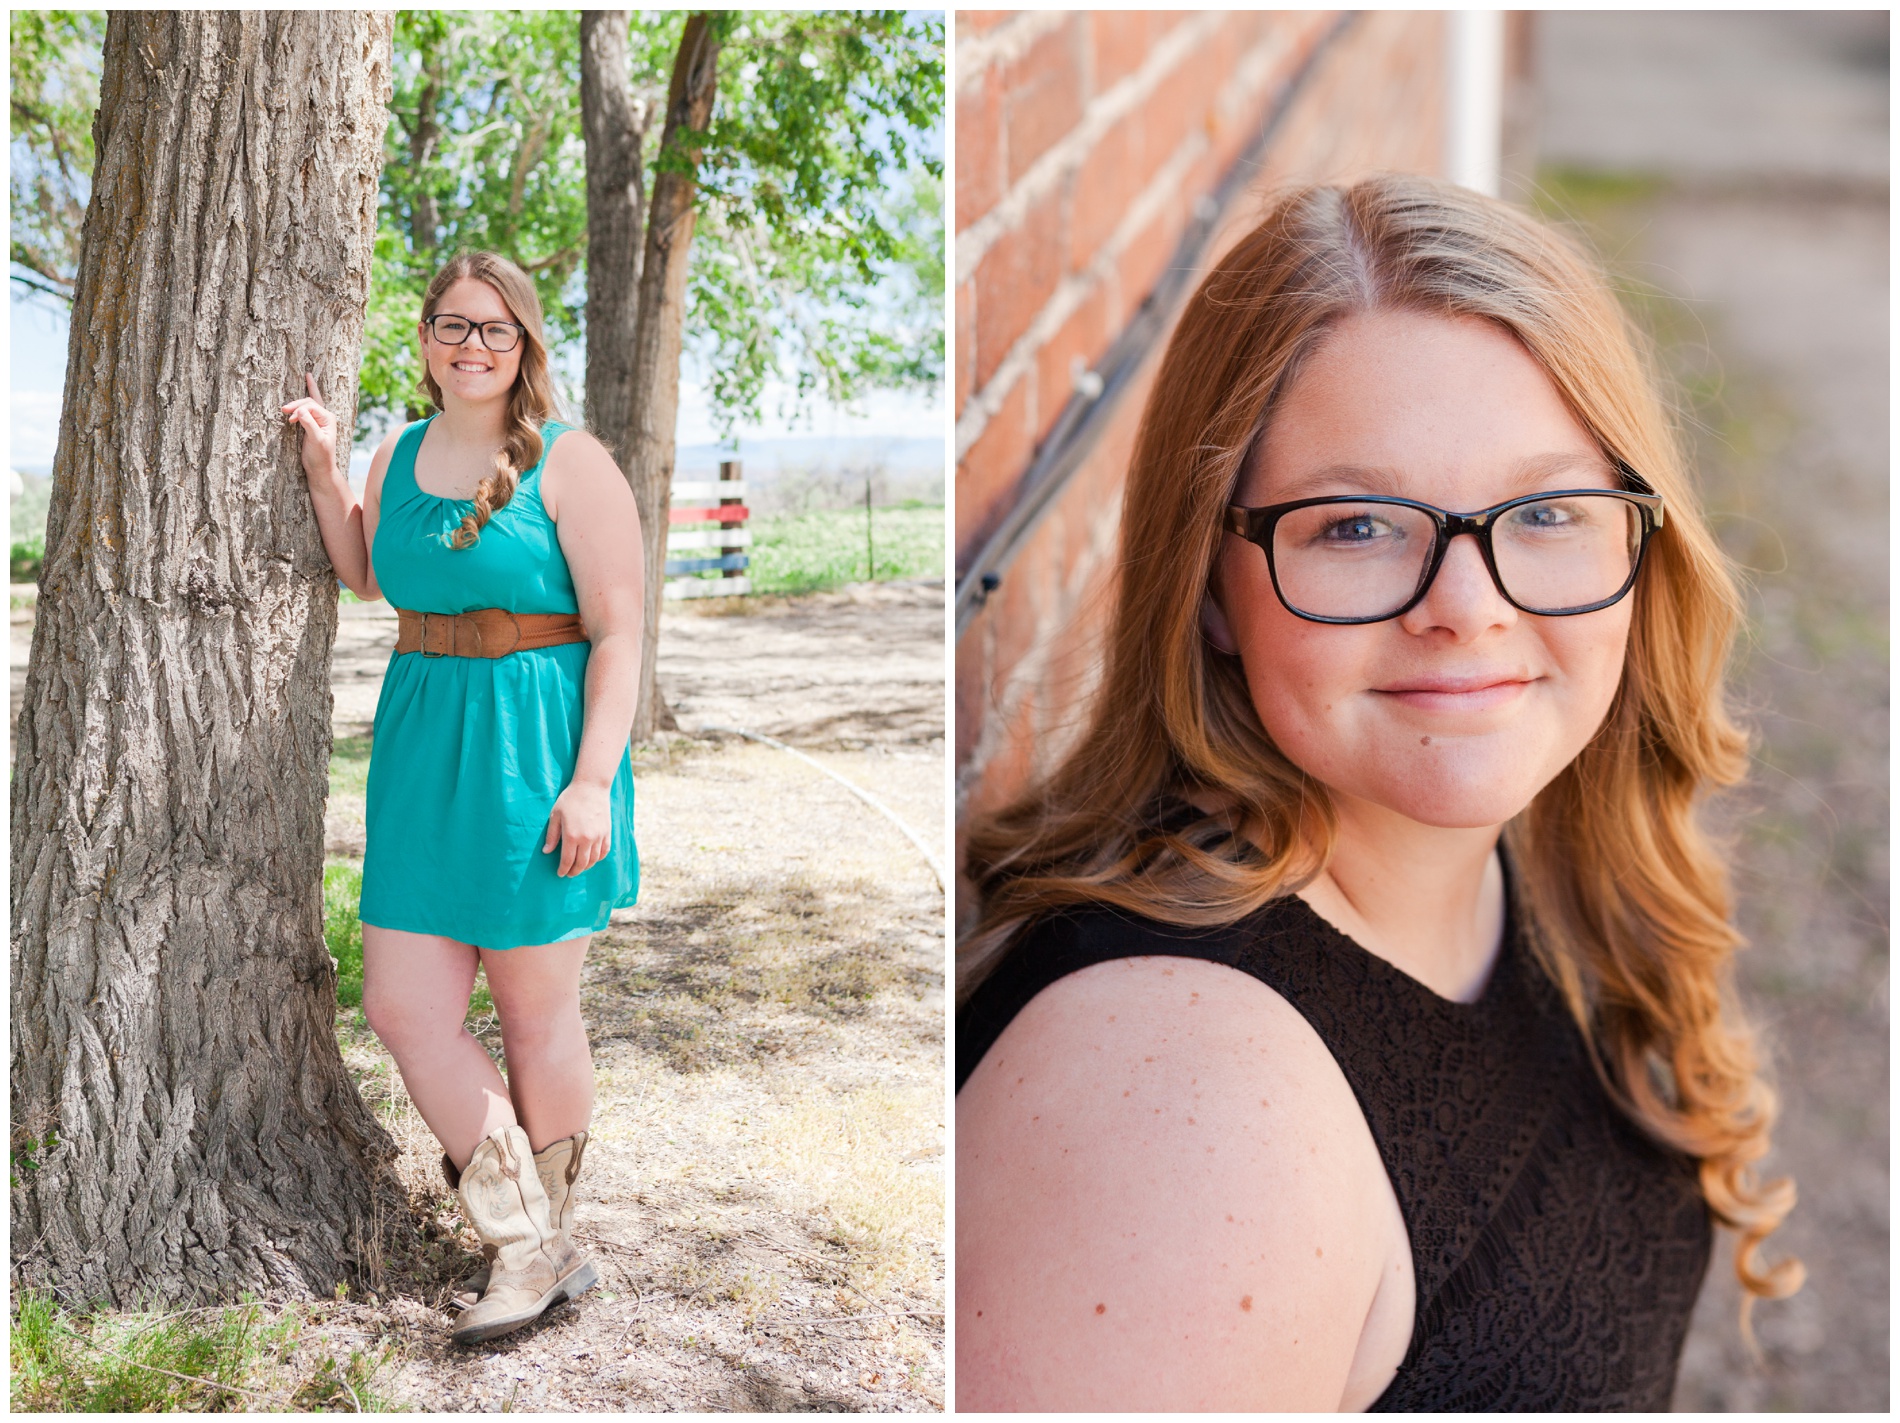 Two senior photos of a girl, one against a tree and one sitting against a brick wall.